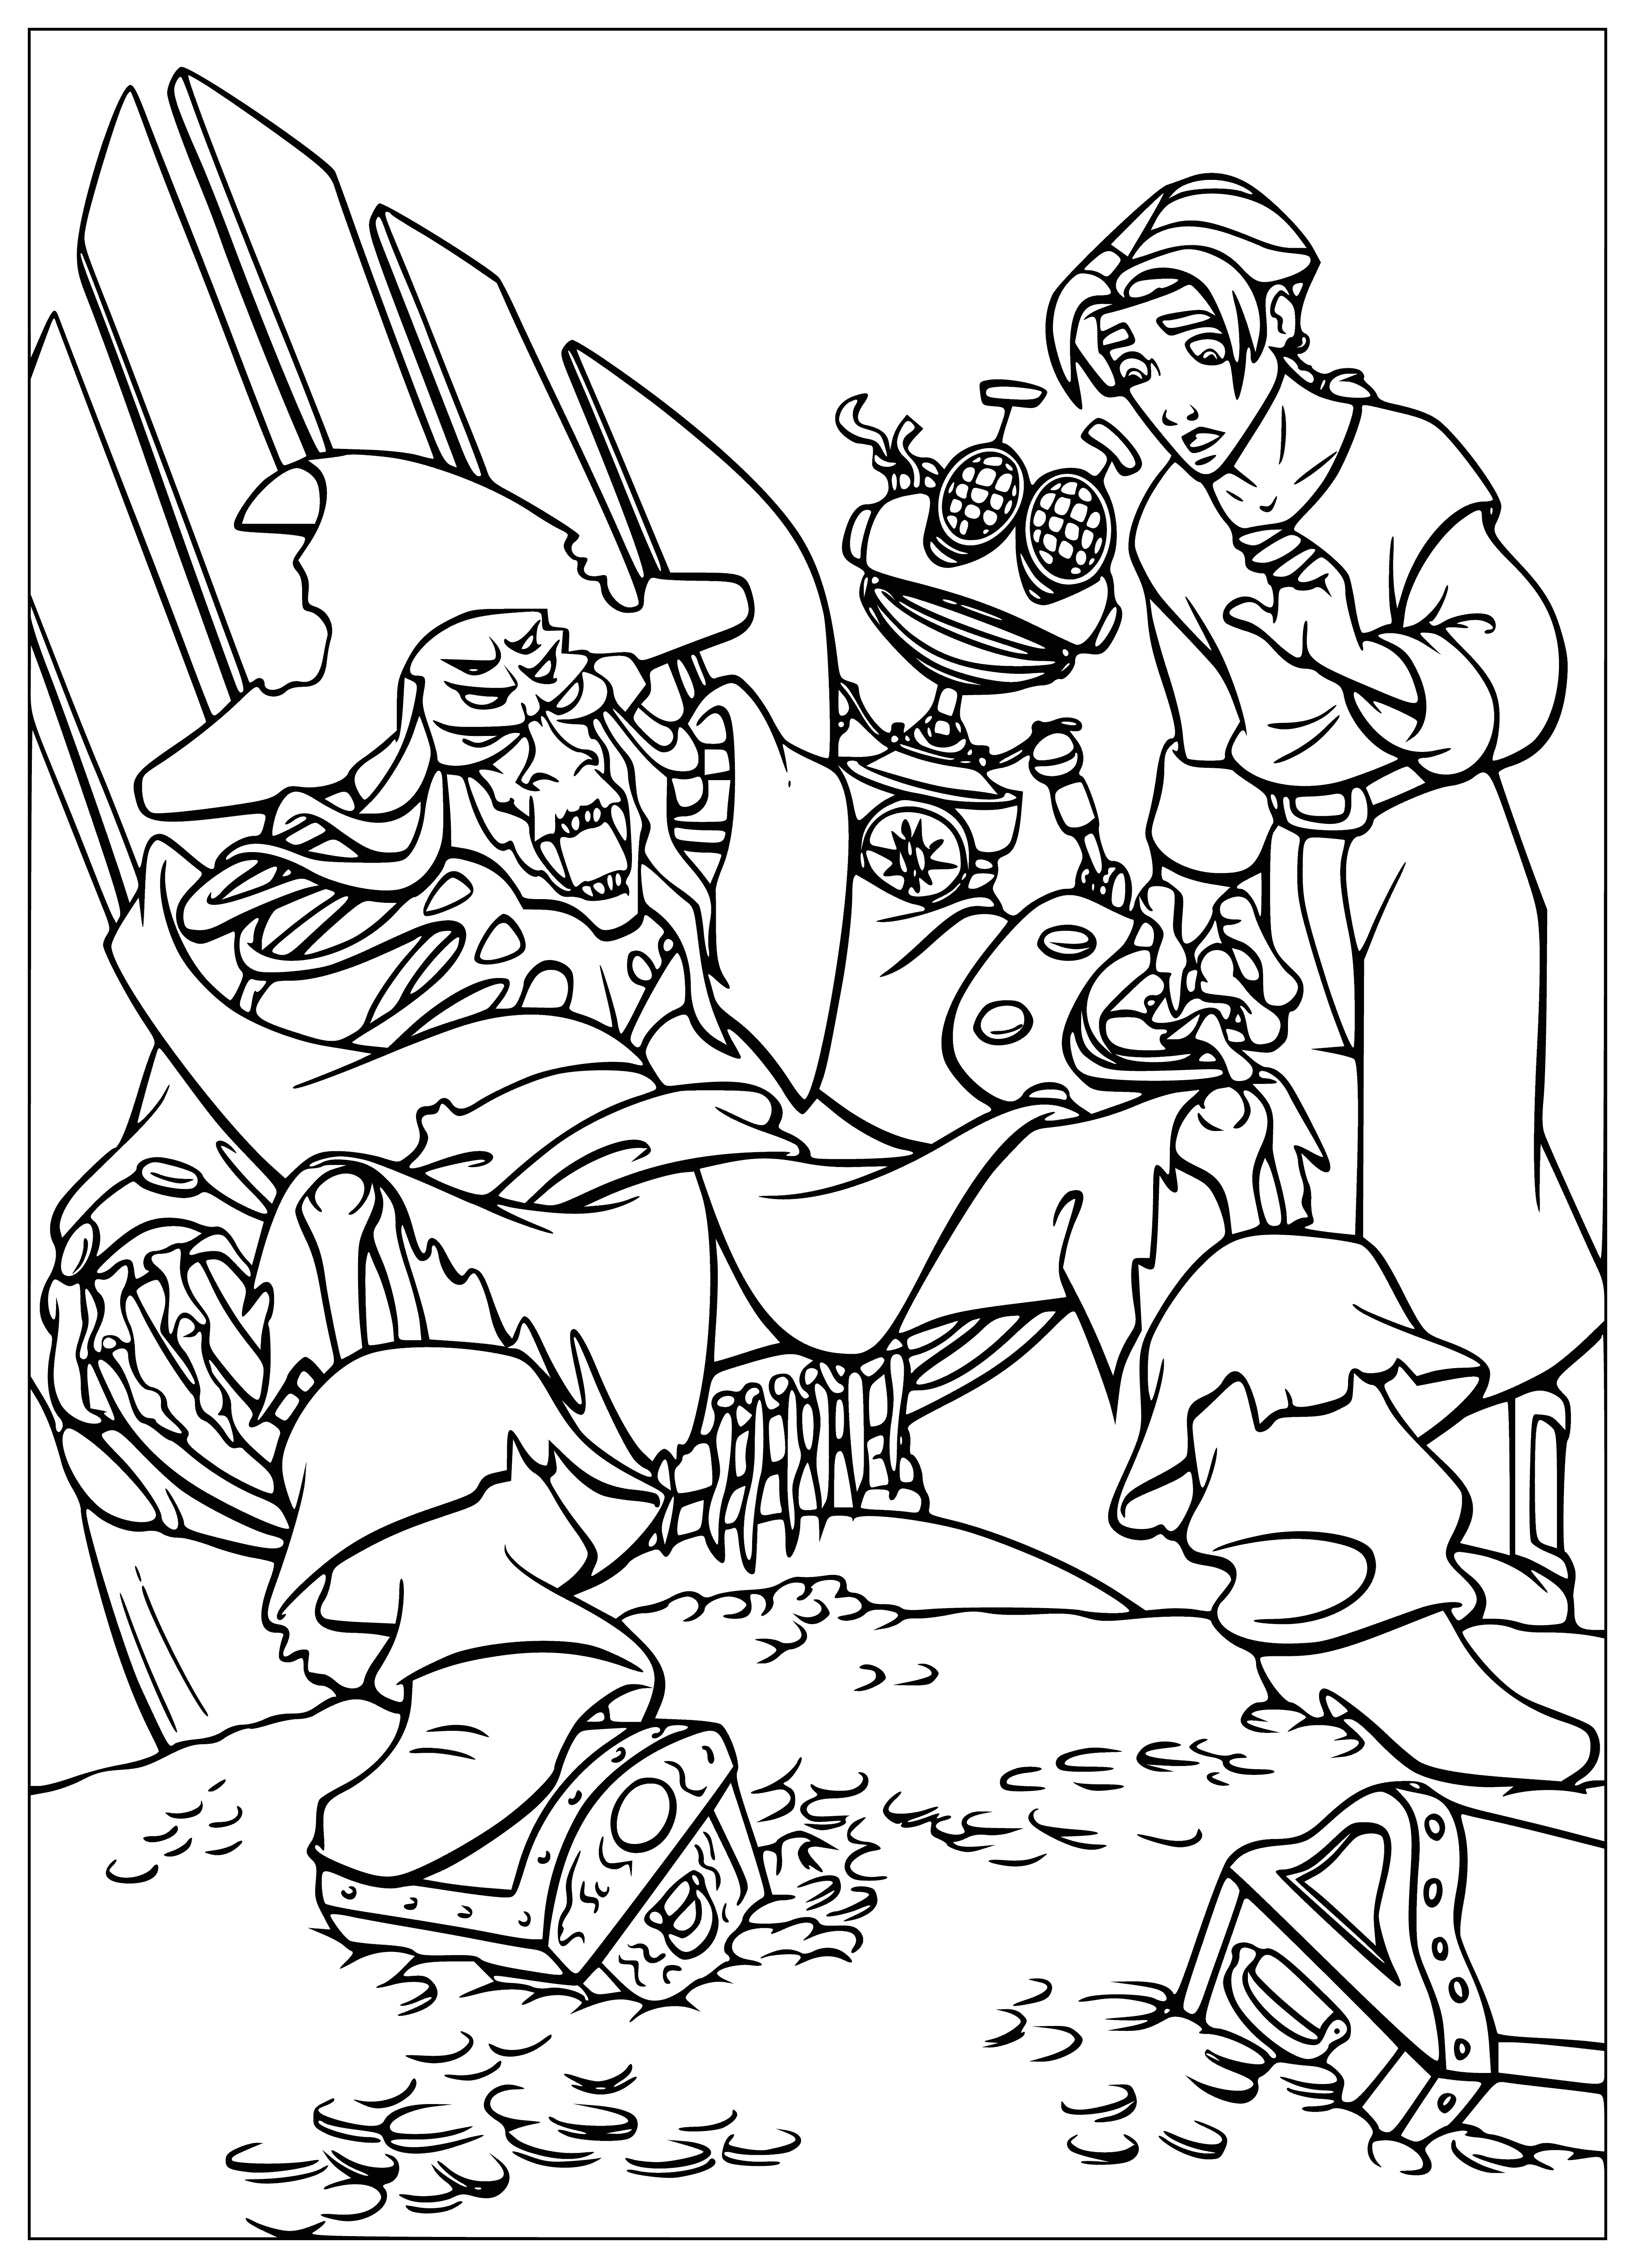 The remains of Flint coloring page